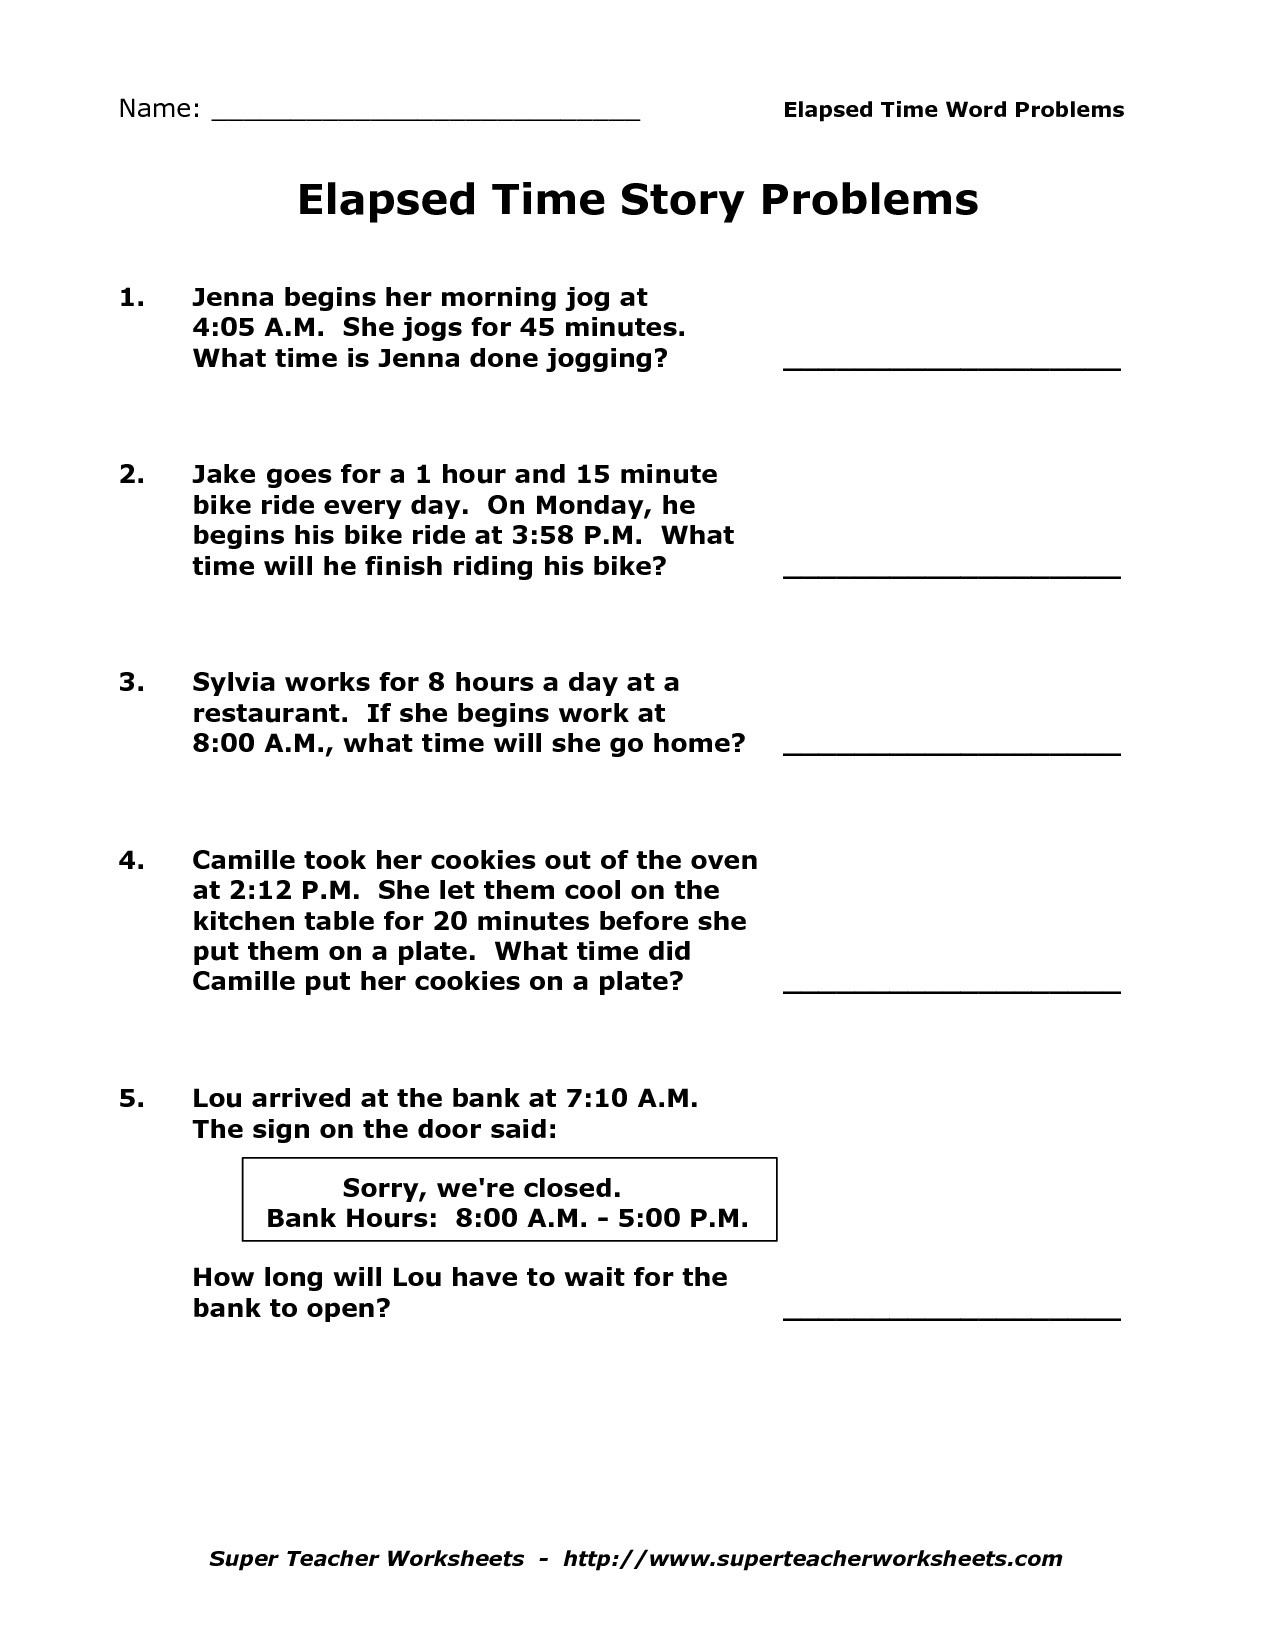 15-best-images-of-easy-elapsed-time-worksheets-telling-time-worksheets-free-printable-telling